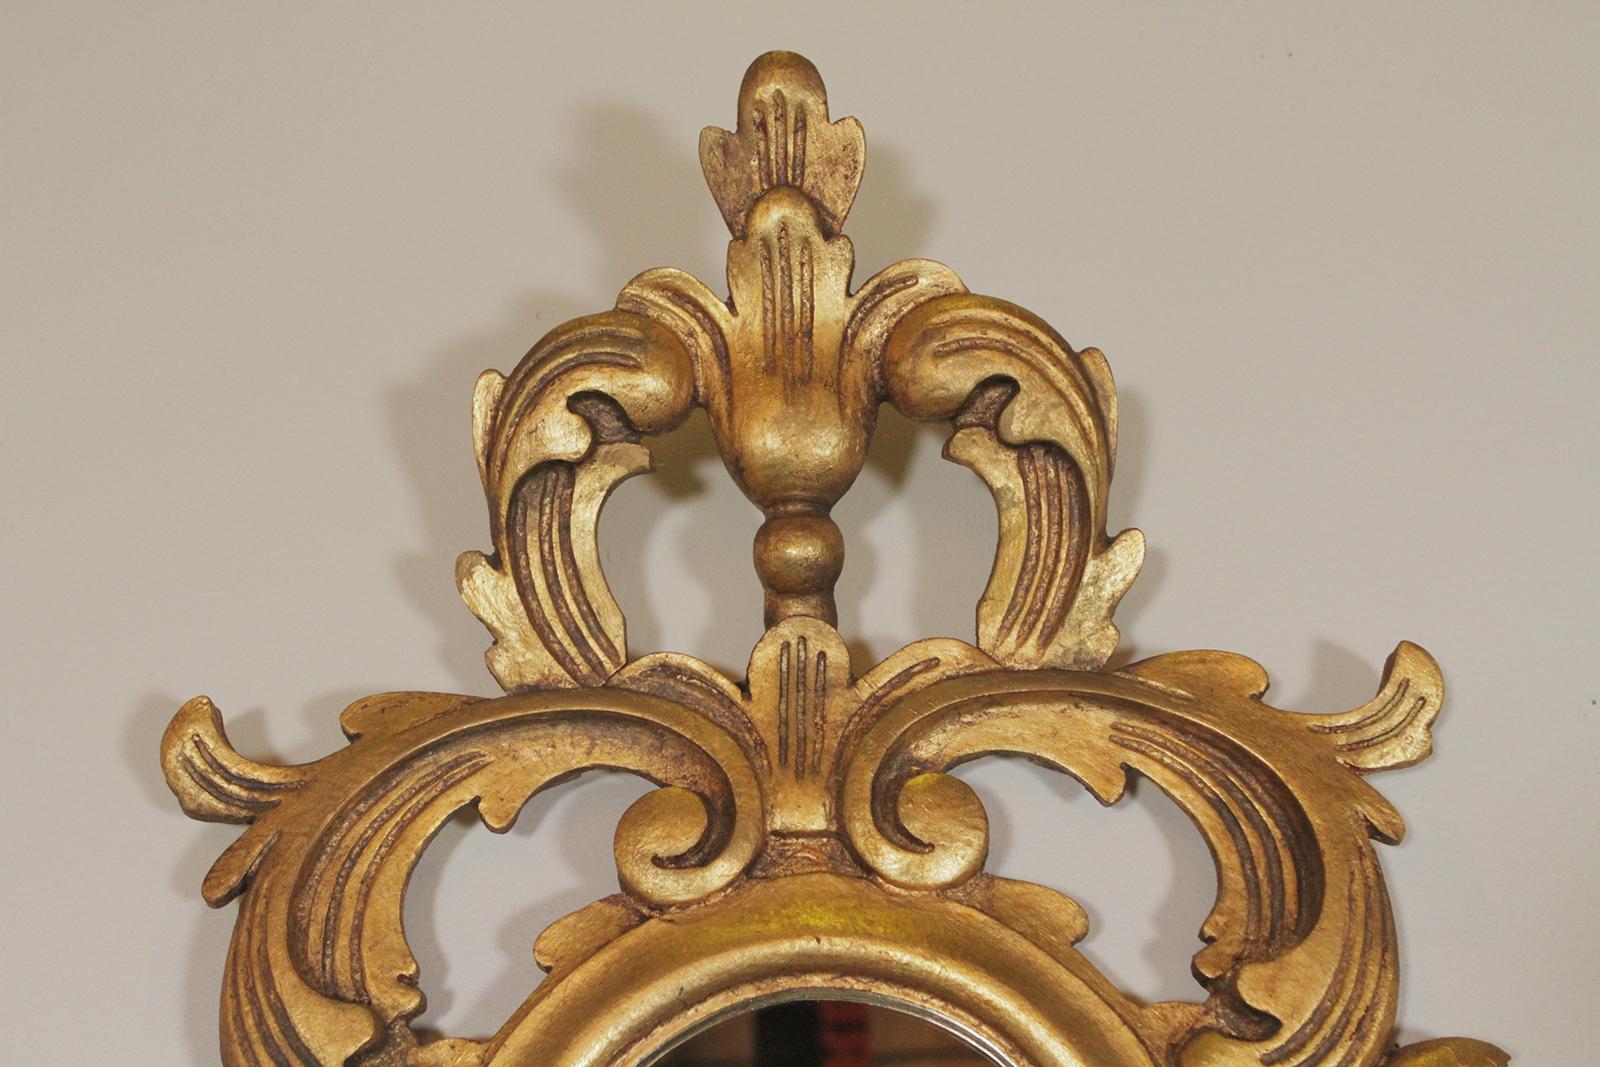 Gold gilt Rococo style carved wood mirror made in Spain
Dimensions: 31”W x 53” H 4” D.
 